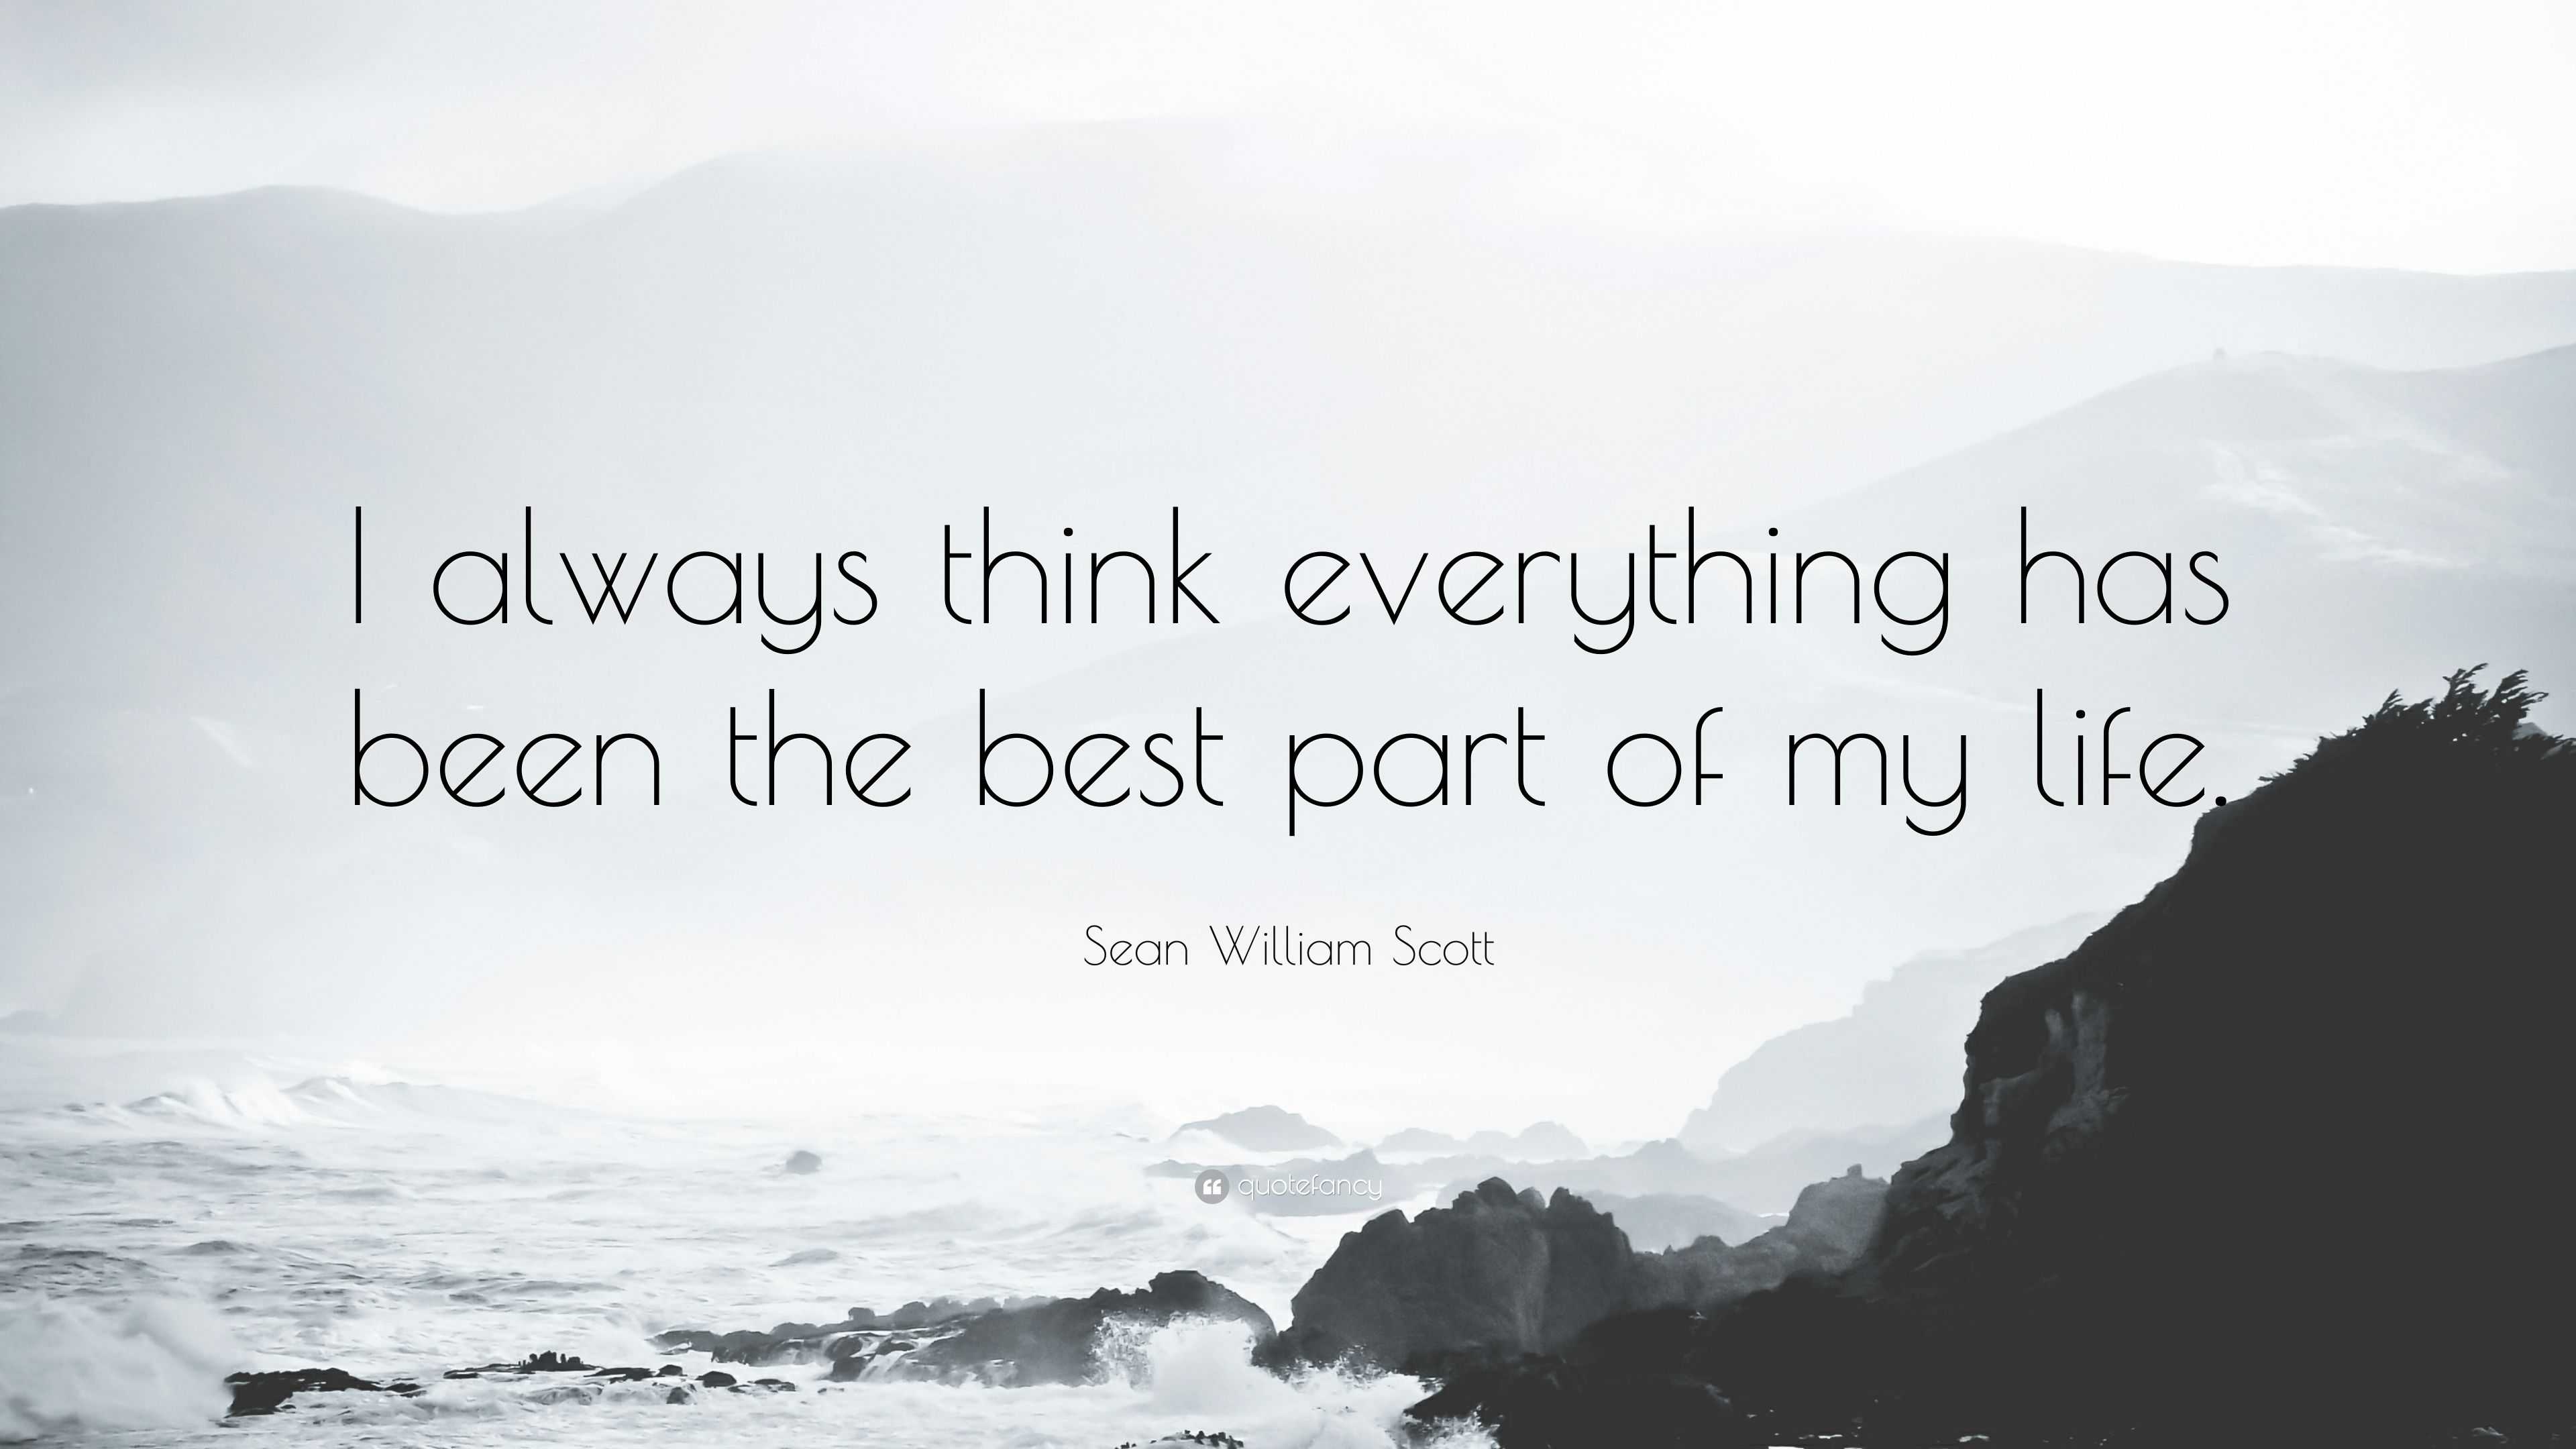 Sean William Scott Quote “I always think everything has been the best part of